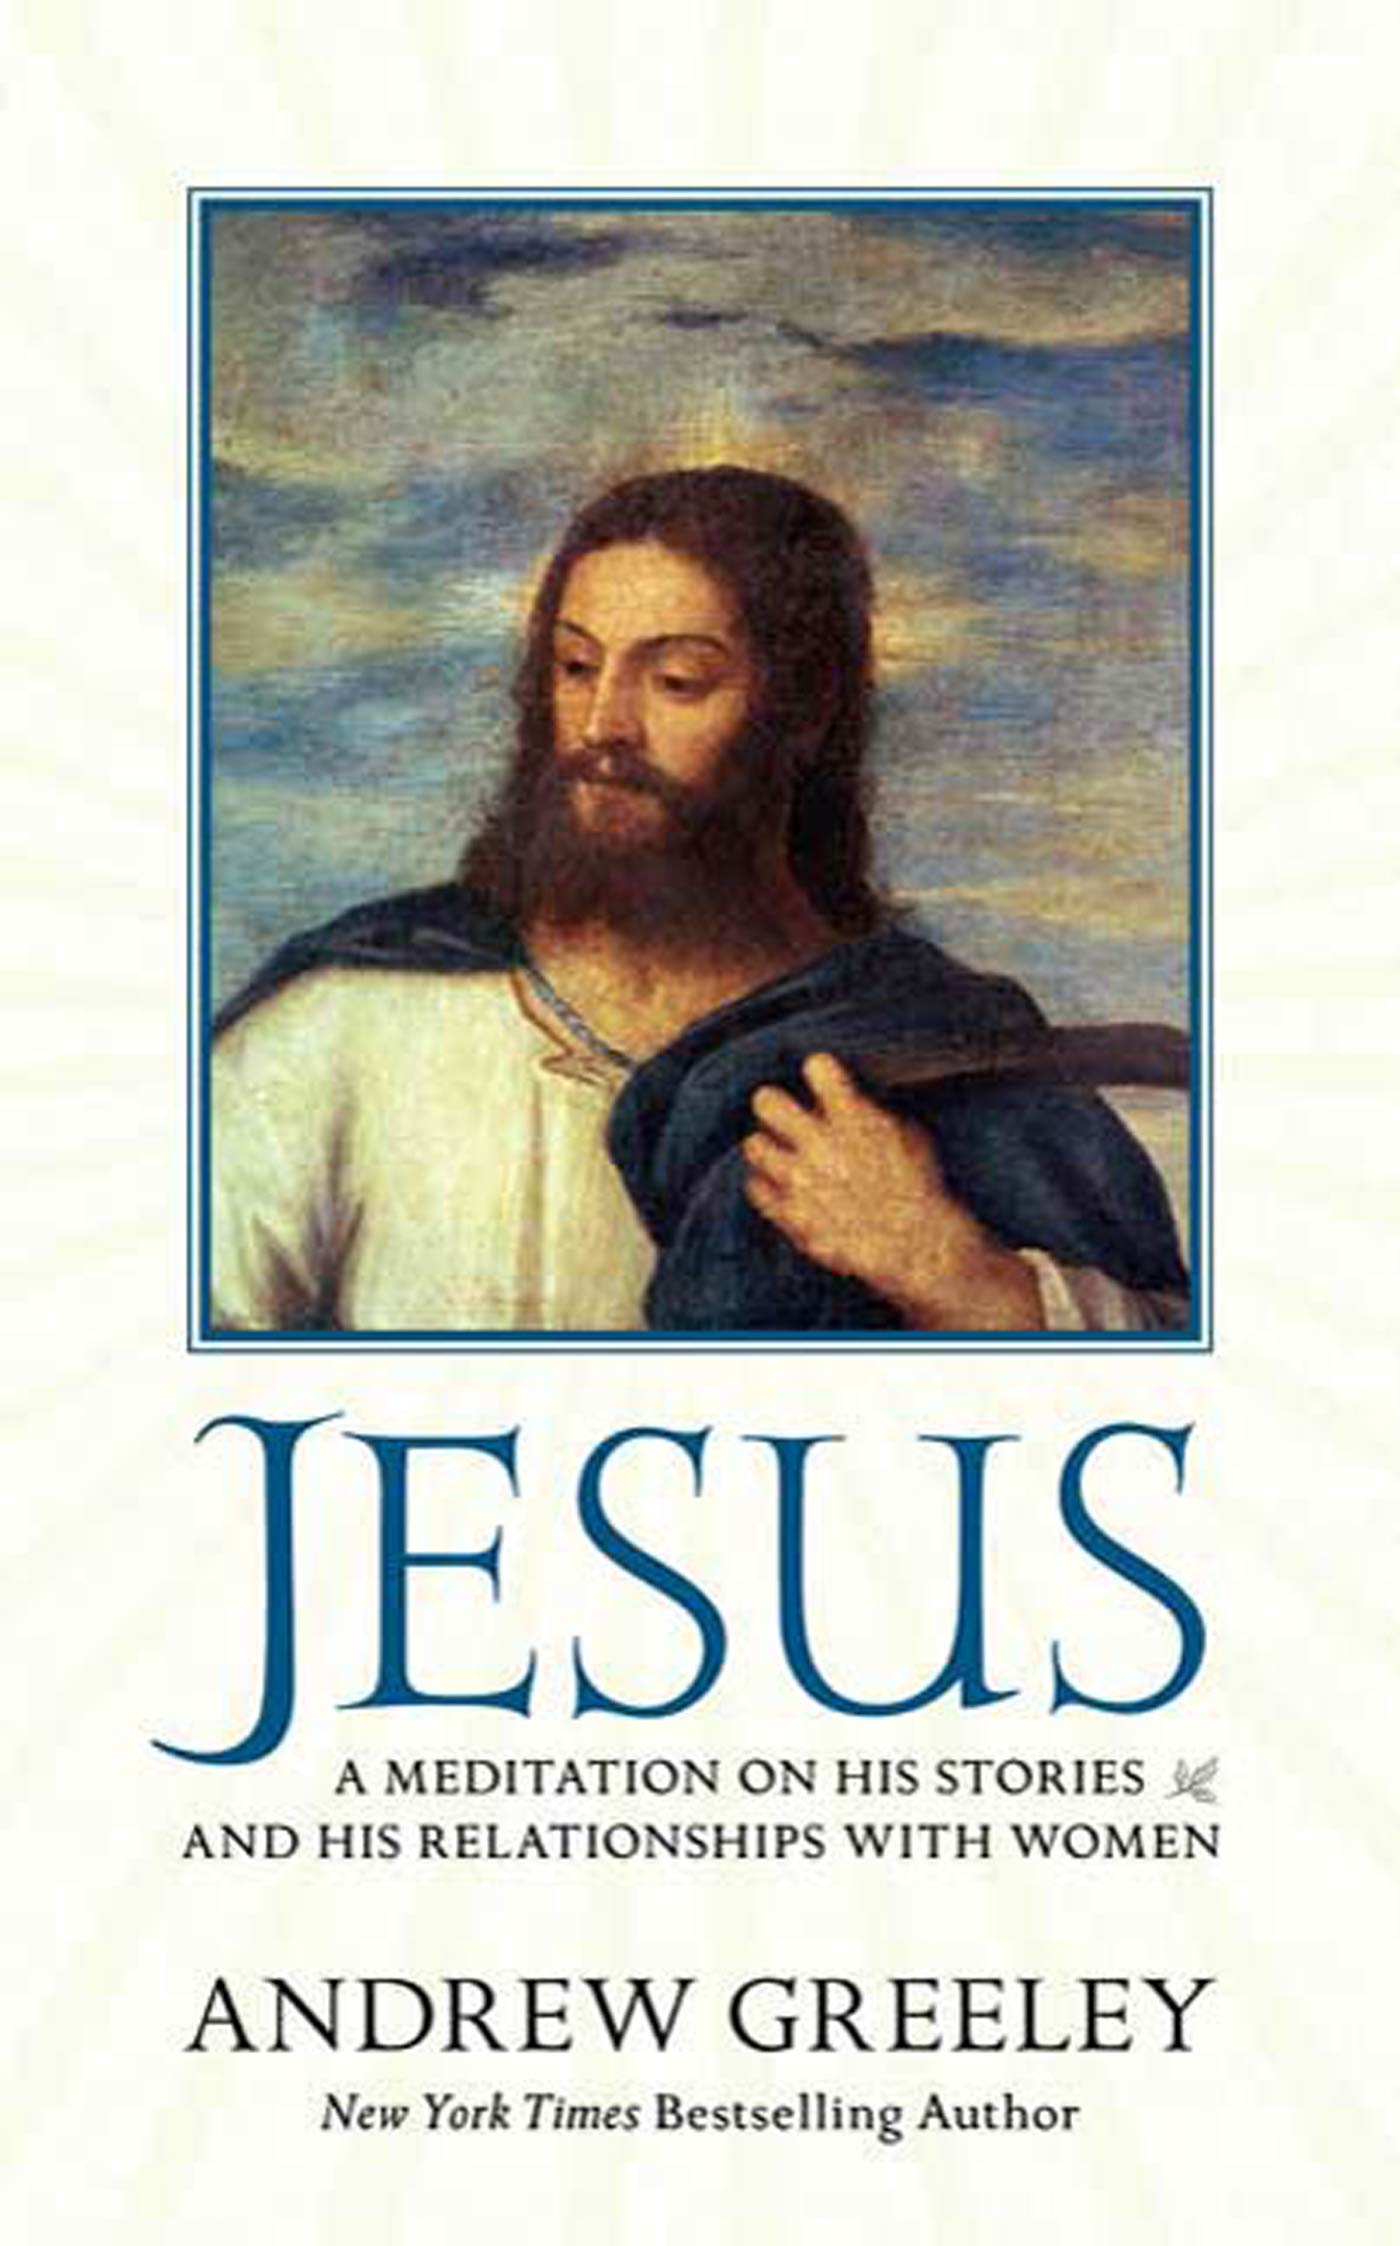 Jesus : A Meditation on His Stories and His Relationships with Women by Andrew M. Greeley